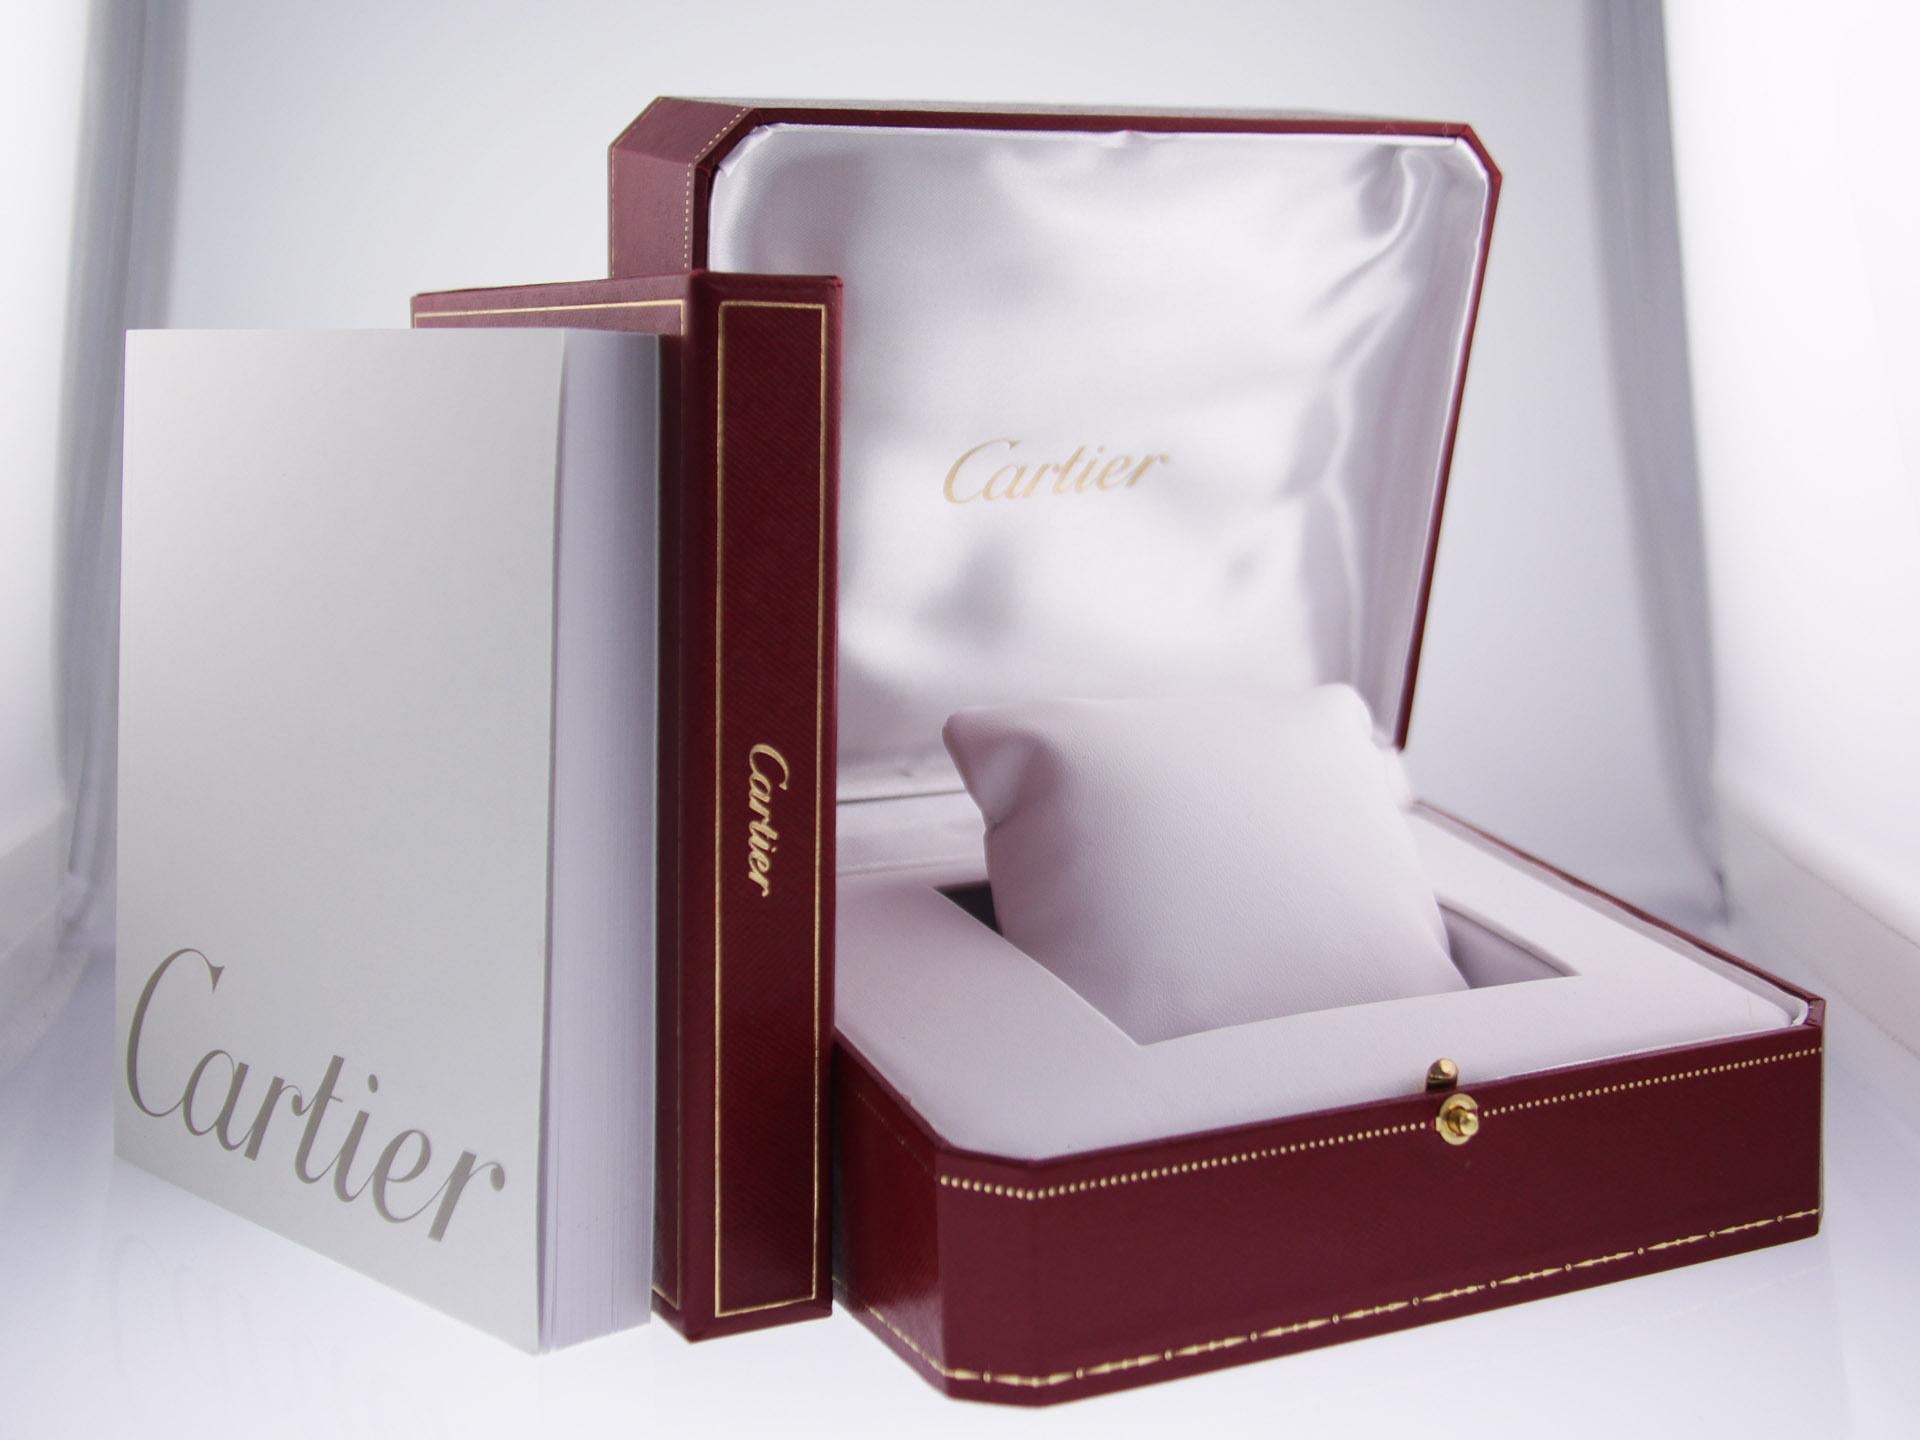 Cartier Ballon Bleu W6920047 watch with Silver Opaline Dial w/ Black Roman Numerals, stainless steel case and Polished Stainless Steel & Solid 18K Yellow Gold Bracelet. Comes with Cartier Box.

Watch	
Brand:	Cartier
Series:	Ballon Bleu de